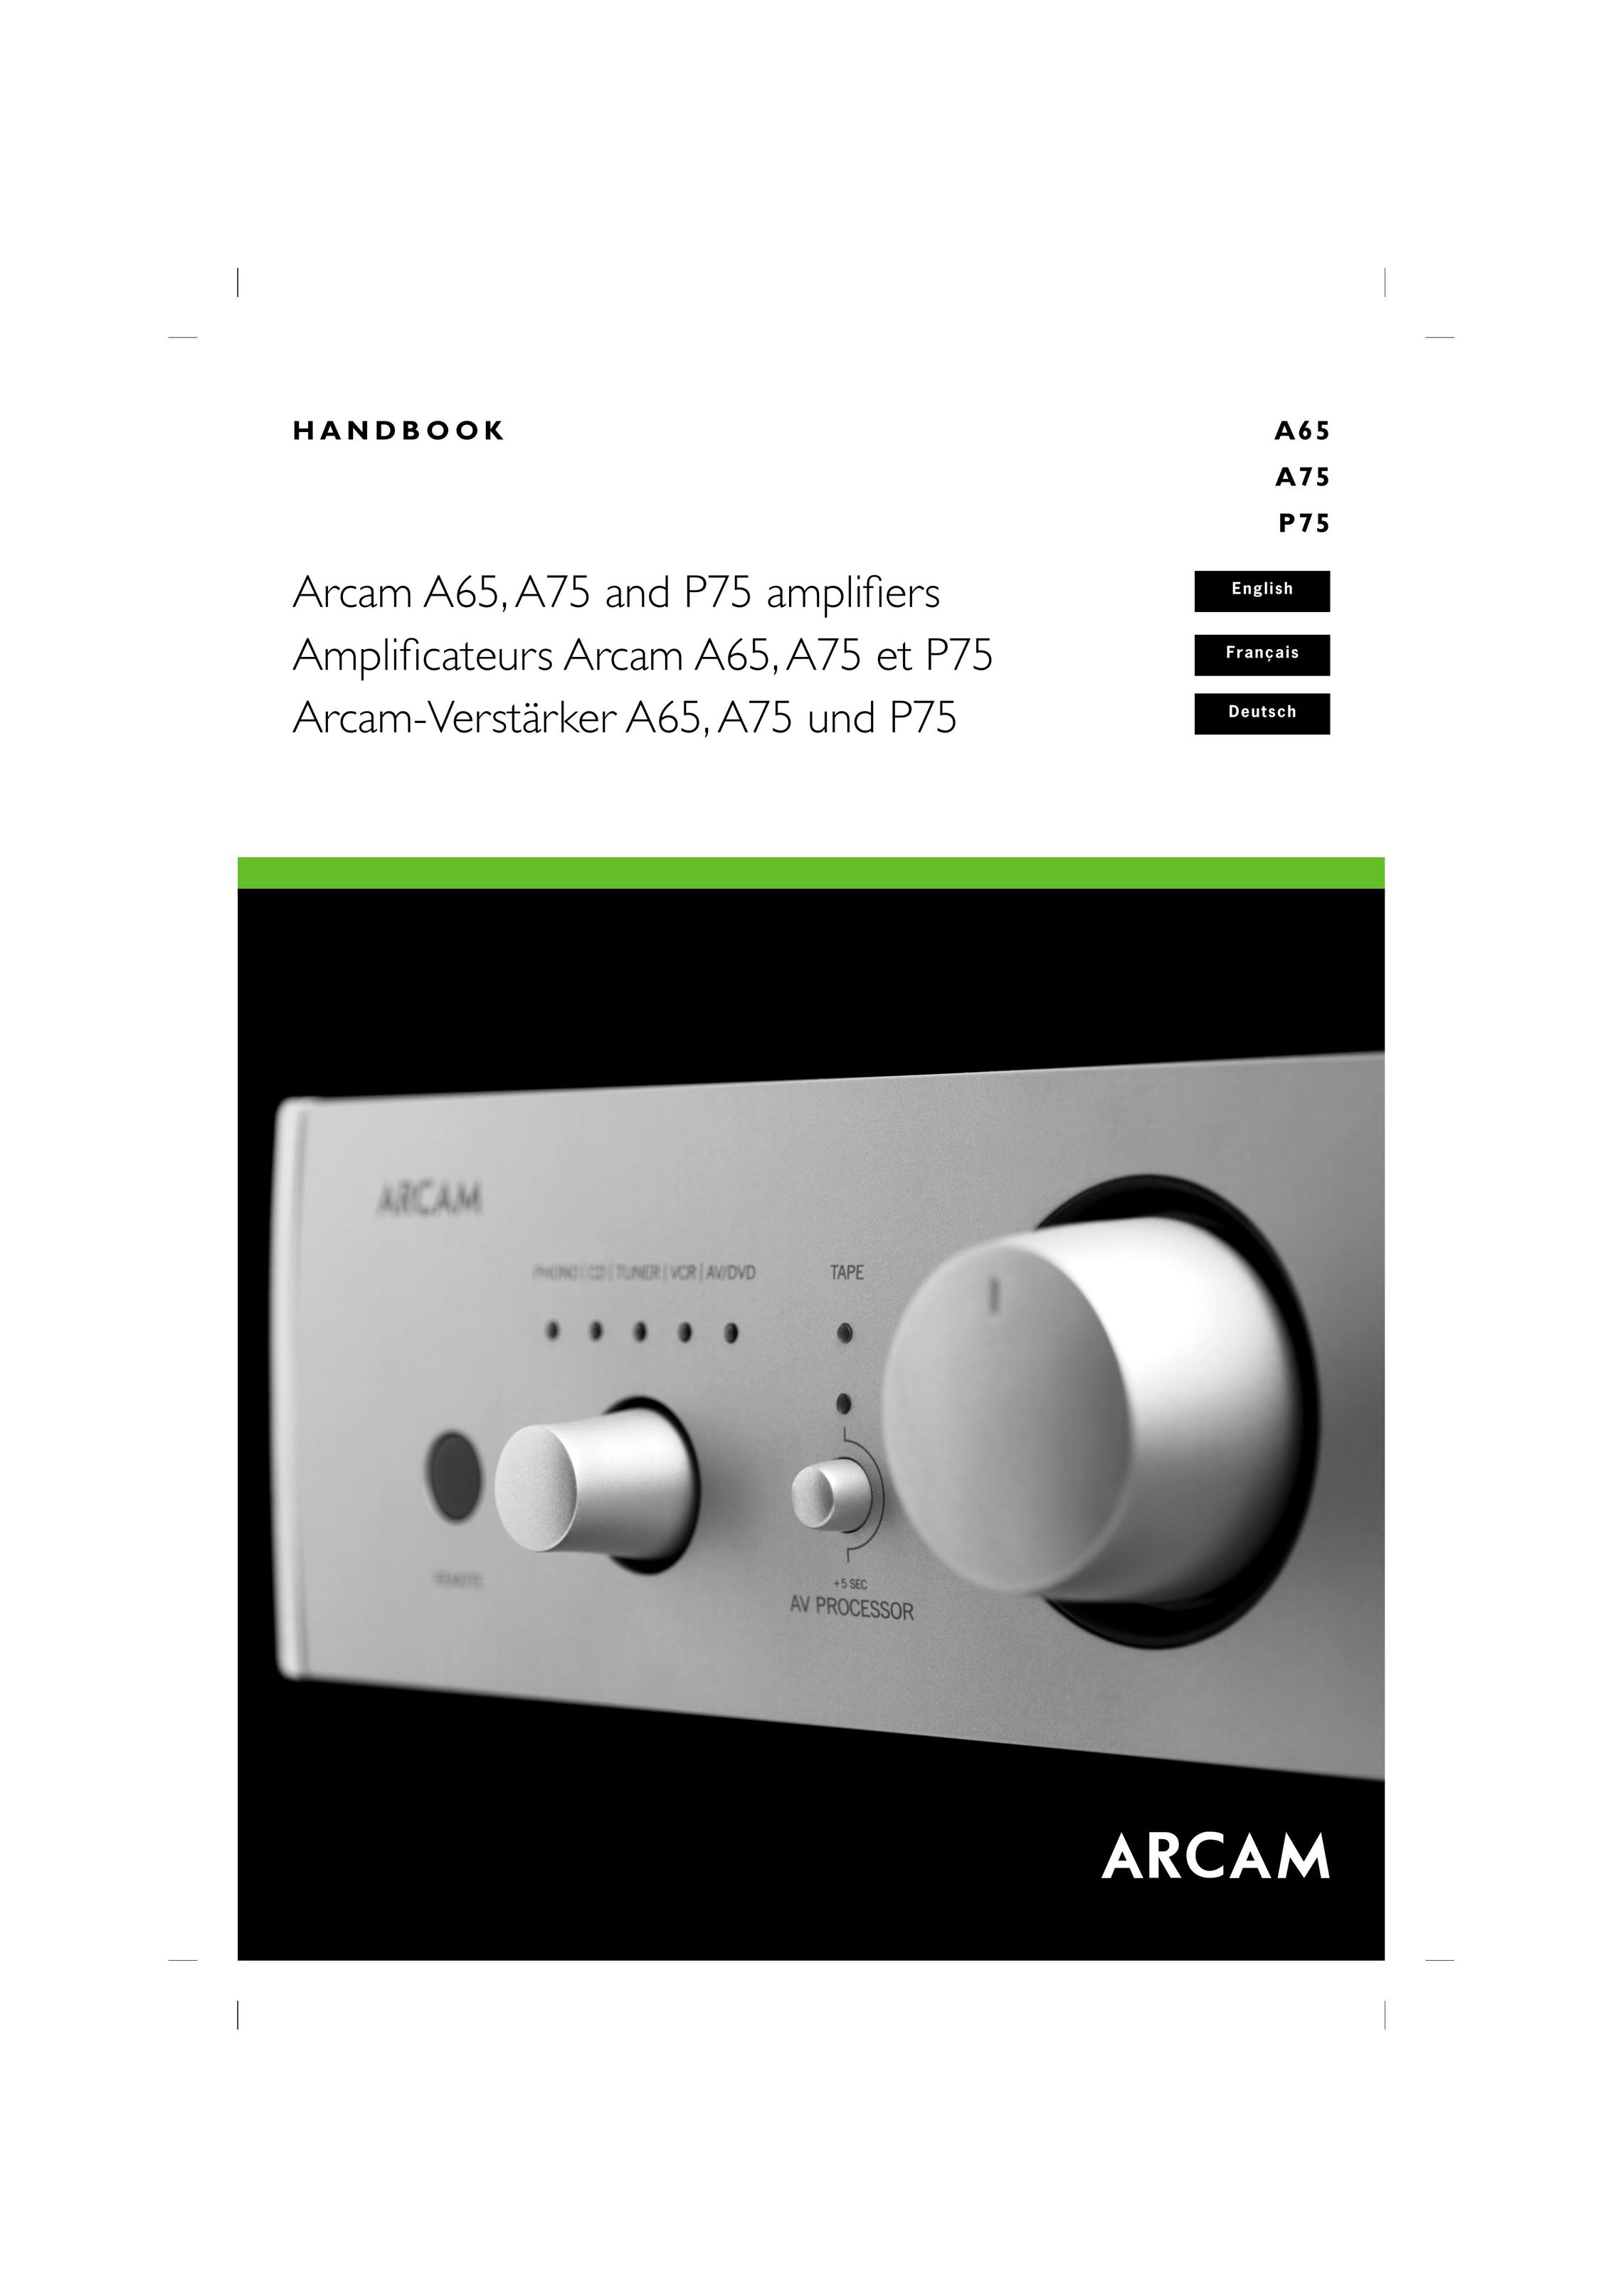 Arcam A75 Stereo Amplifier User Manual